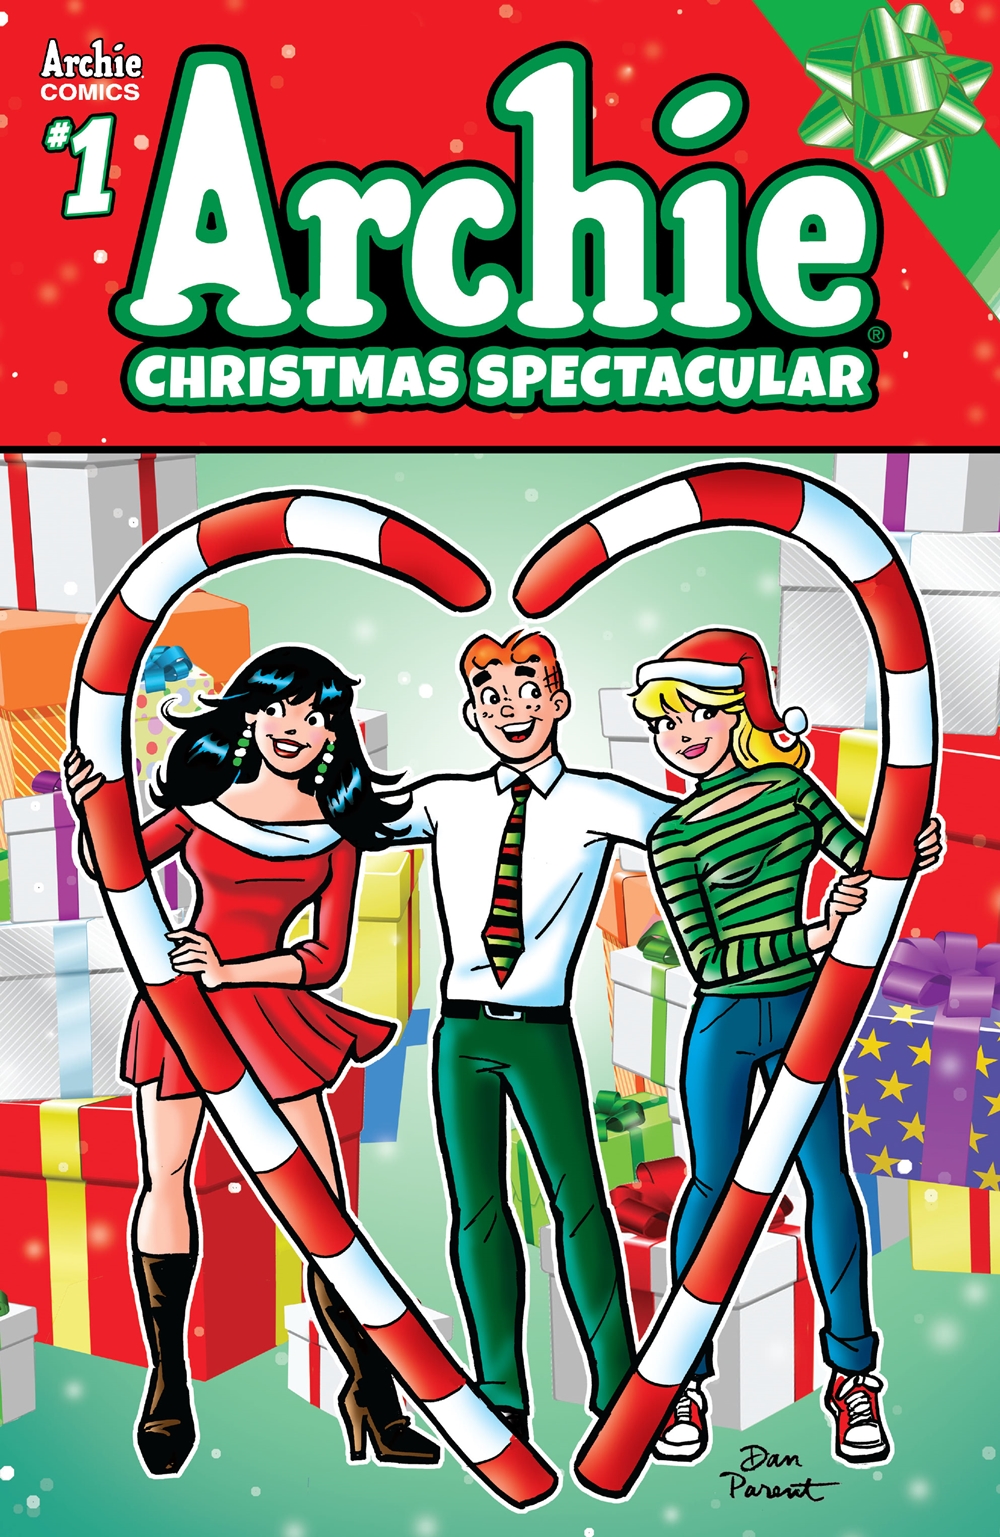 Archie%2527s%2BChristmas%2BSpectacular%2B2020%2B001-000